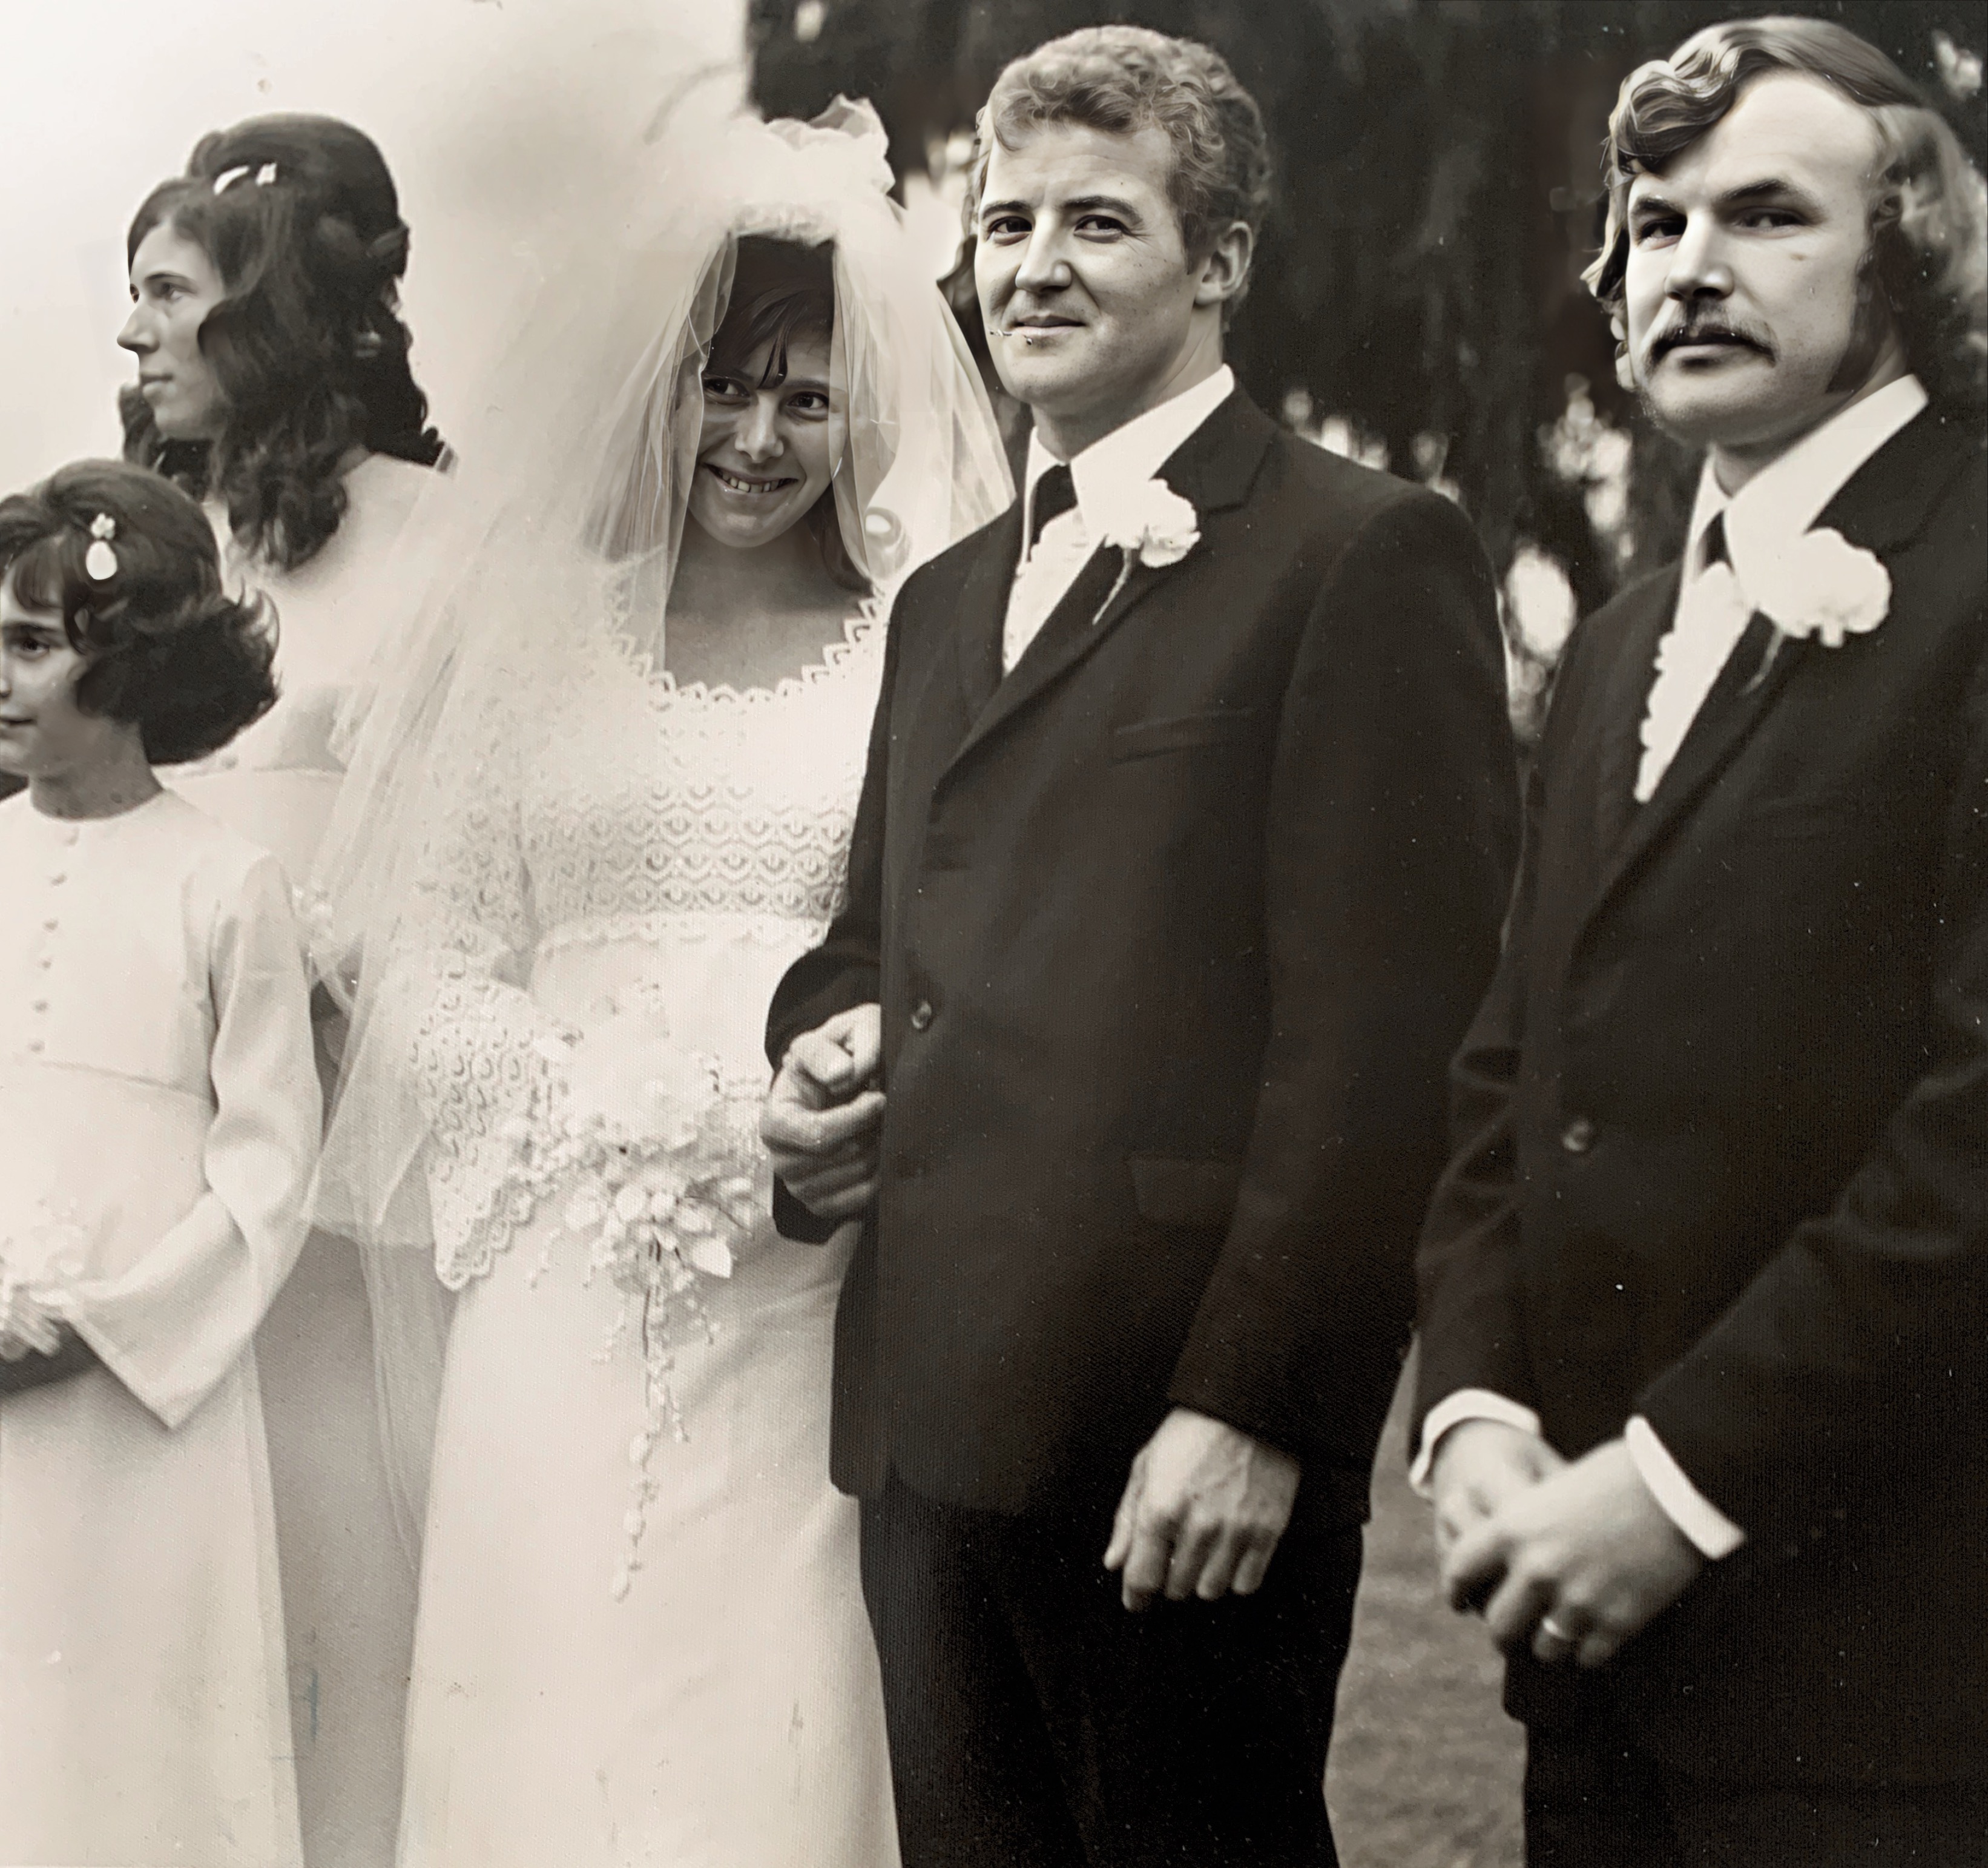 Shirley and Tony’s wedding day. 27th May 1972.